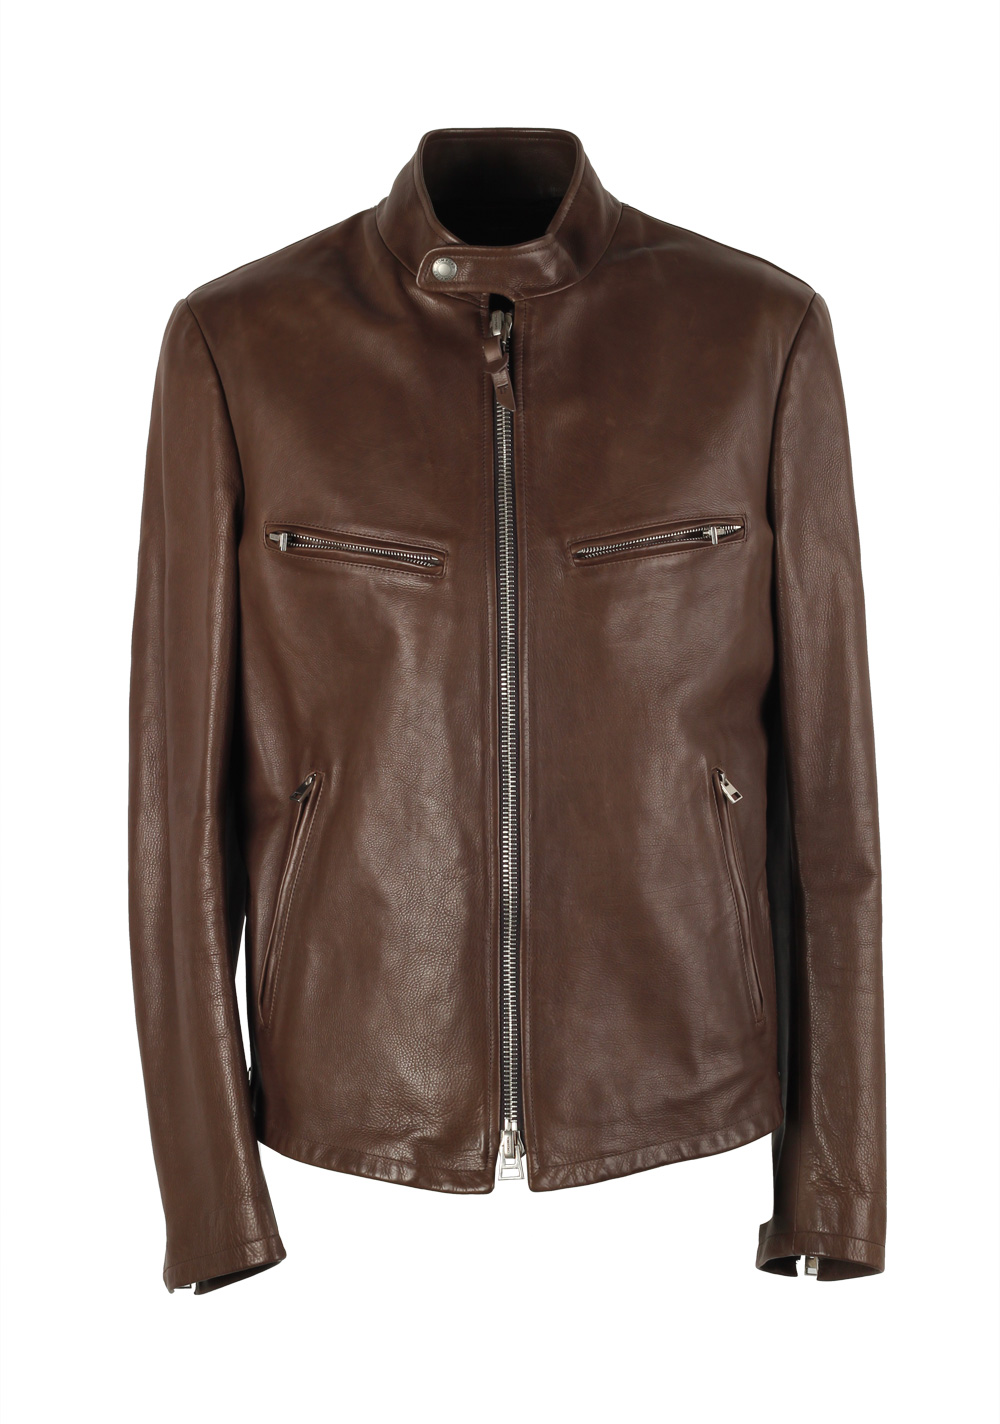 TOM FORD Brown Leather Jacket Coat Size 48 / 38R U.S. | Costume Limité